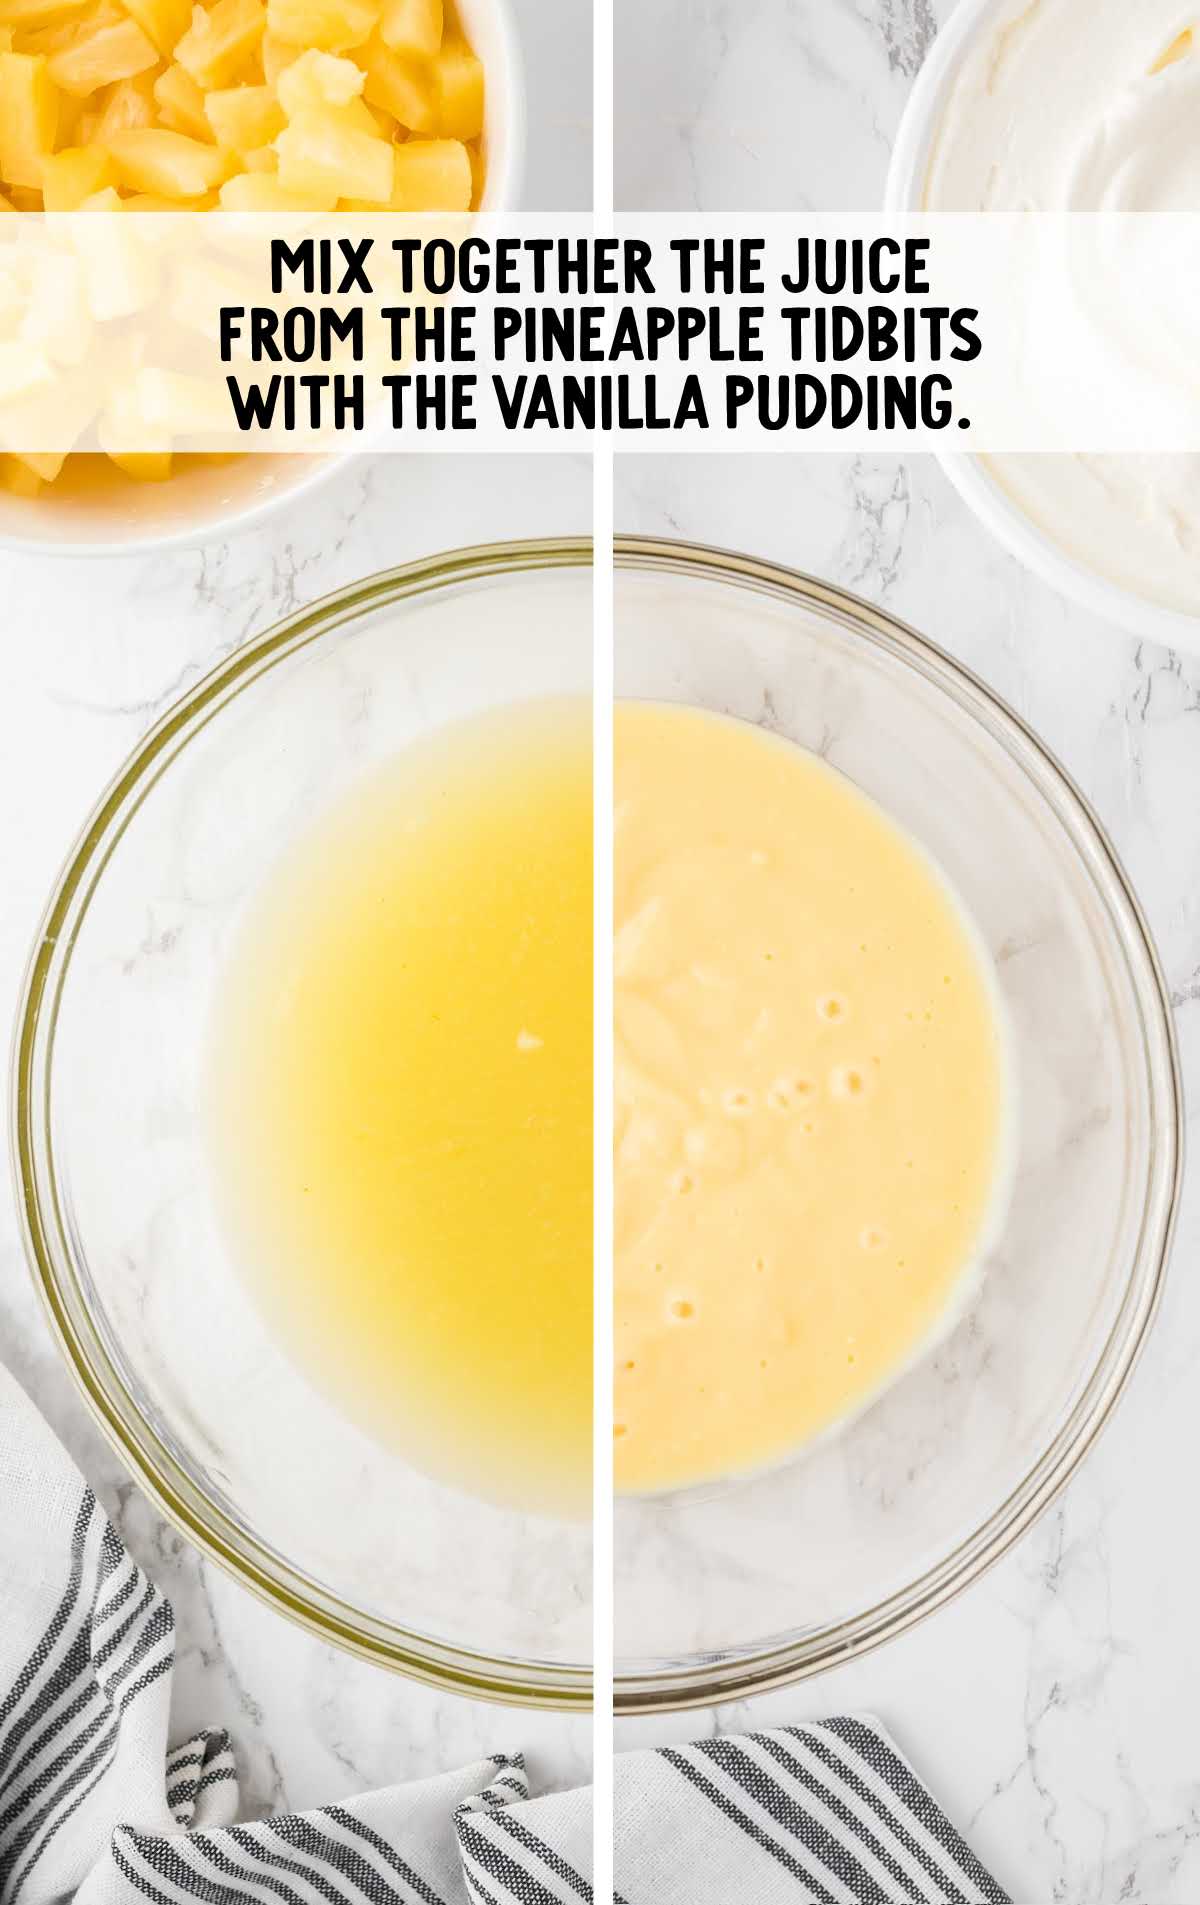 pineapple tidbits juice mixed with the vanilla pudding